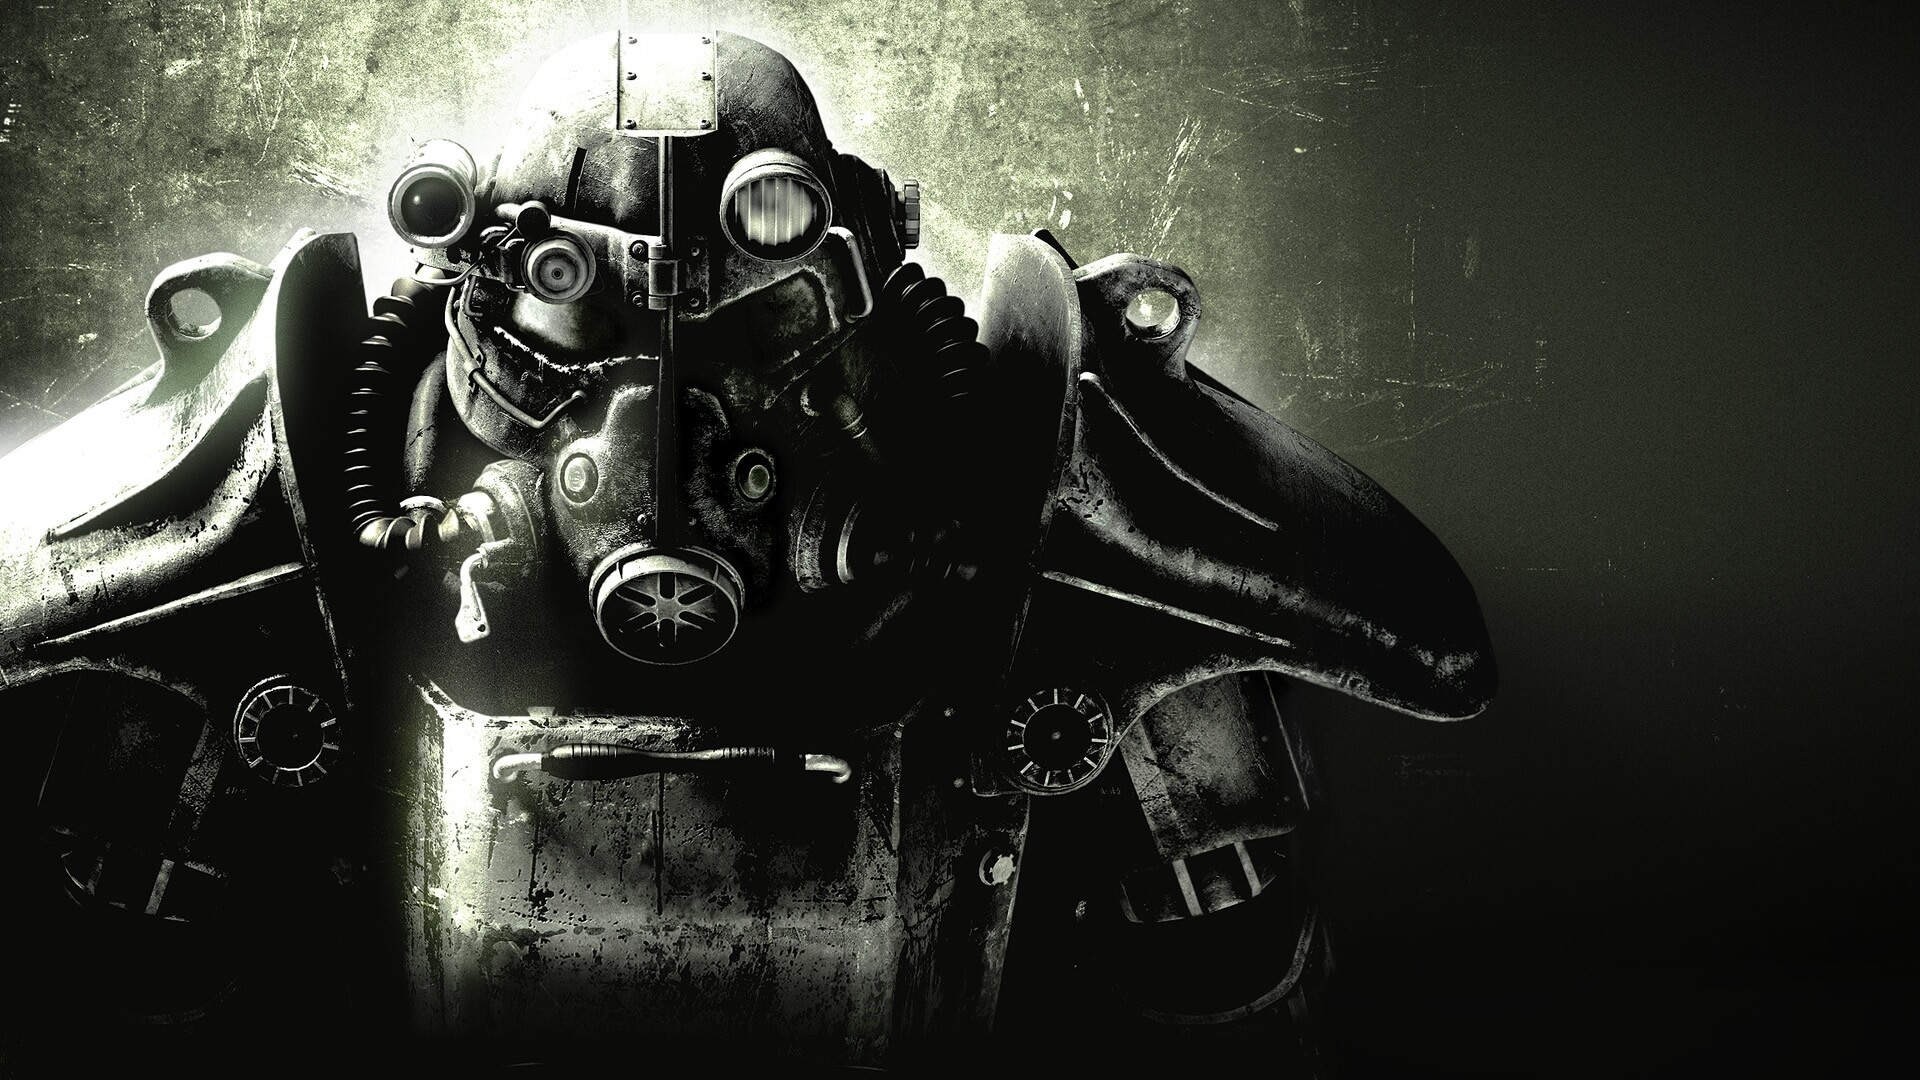 Fallout: The series' first title, Fallout, was developed by Black Isle Studios and released in 1997. 1920x1080 Full HD Wallpaper.